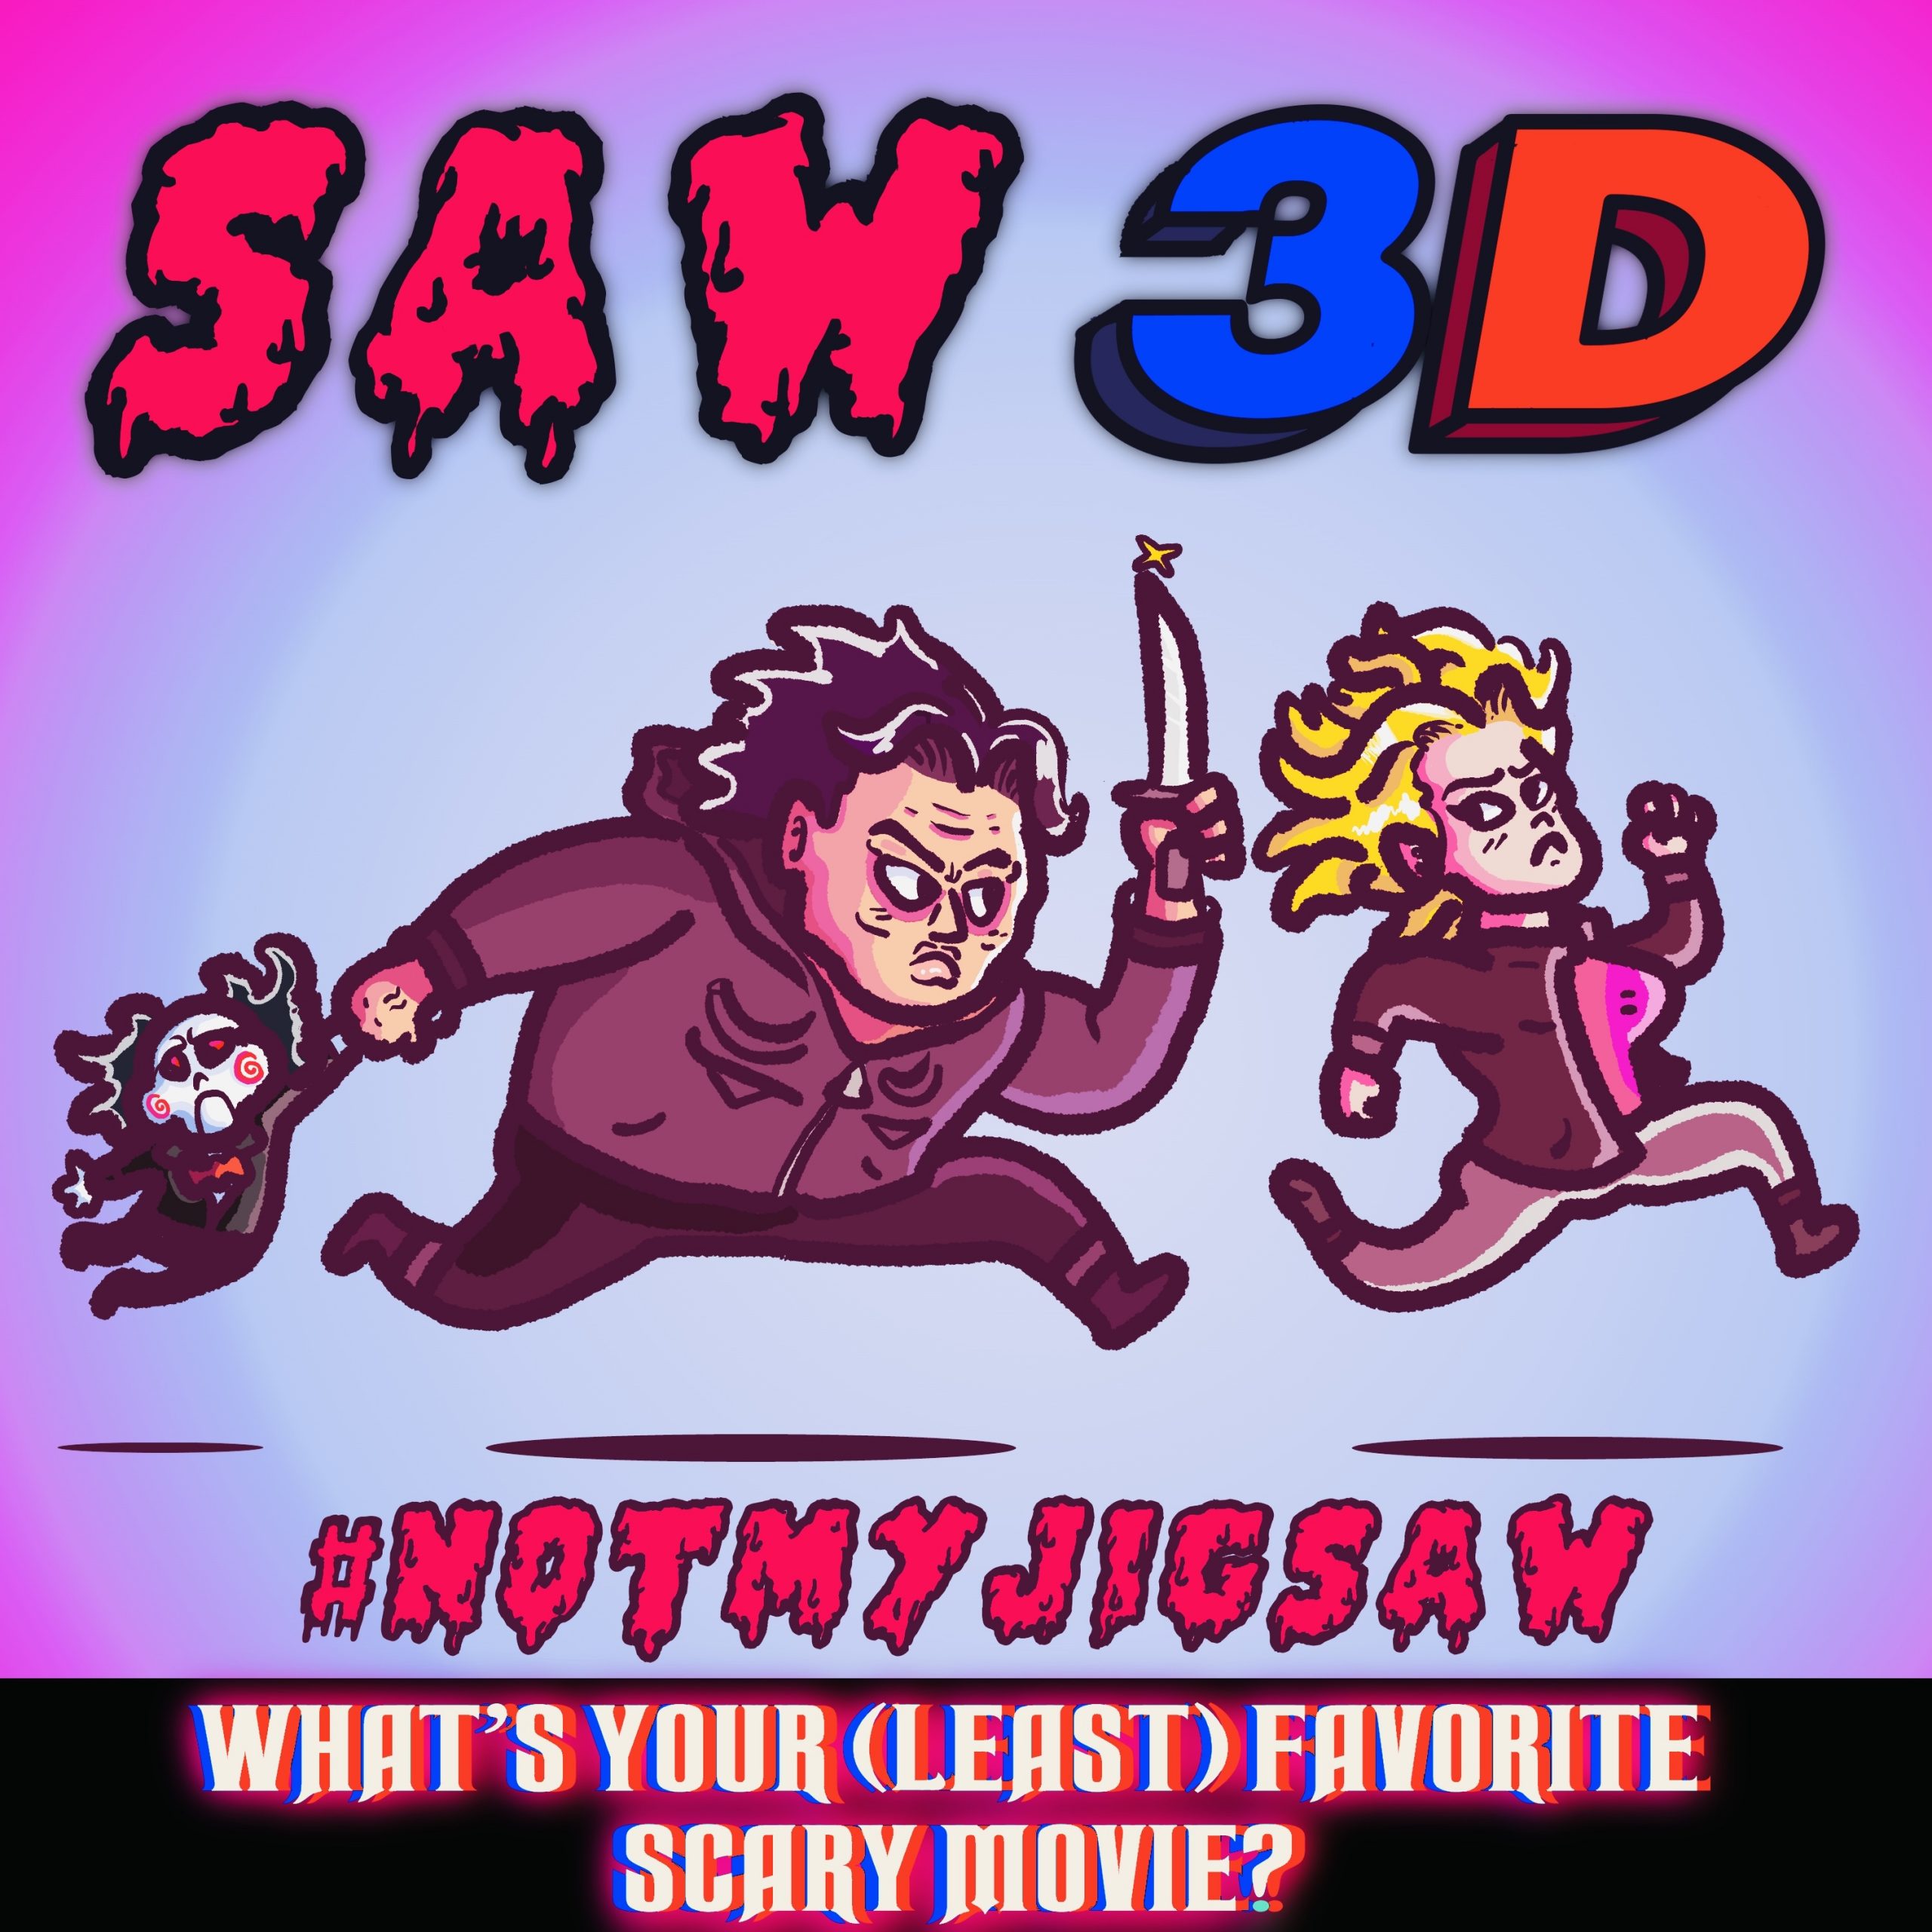 #197: Saw 3D: The Final Chapter (2010)